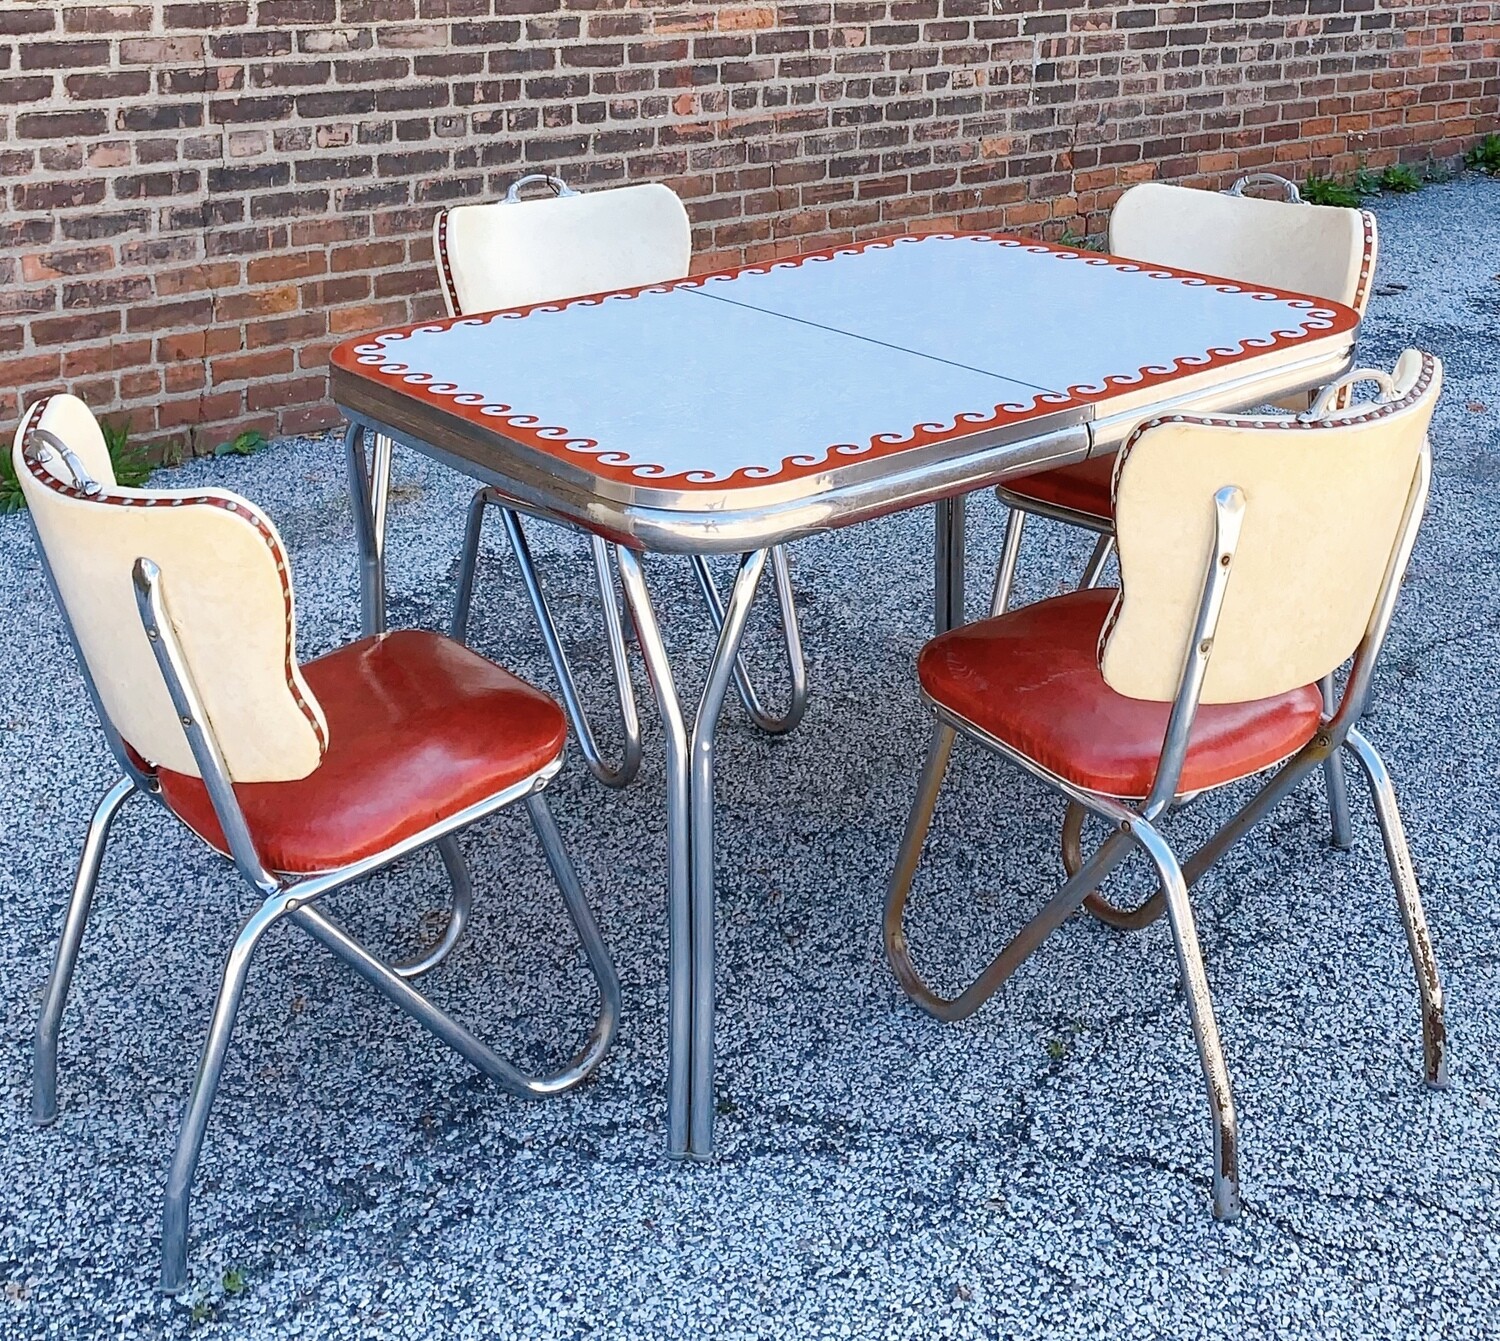 1950’s Retro Diner Table + 4Chairs (48”L x 35.5”W x 30”H)